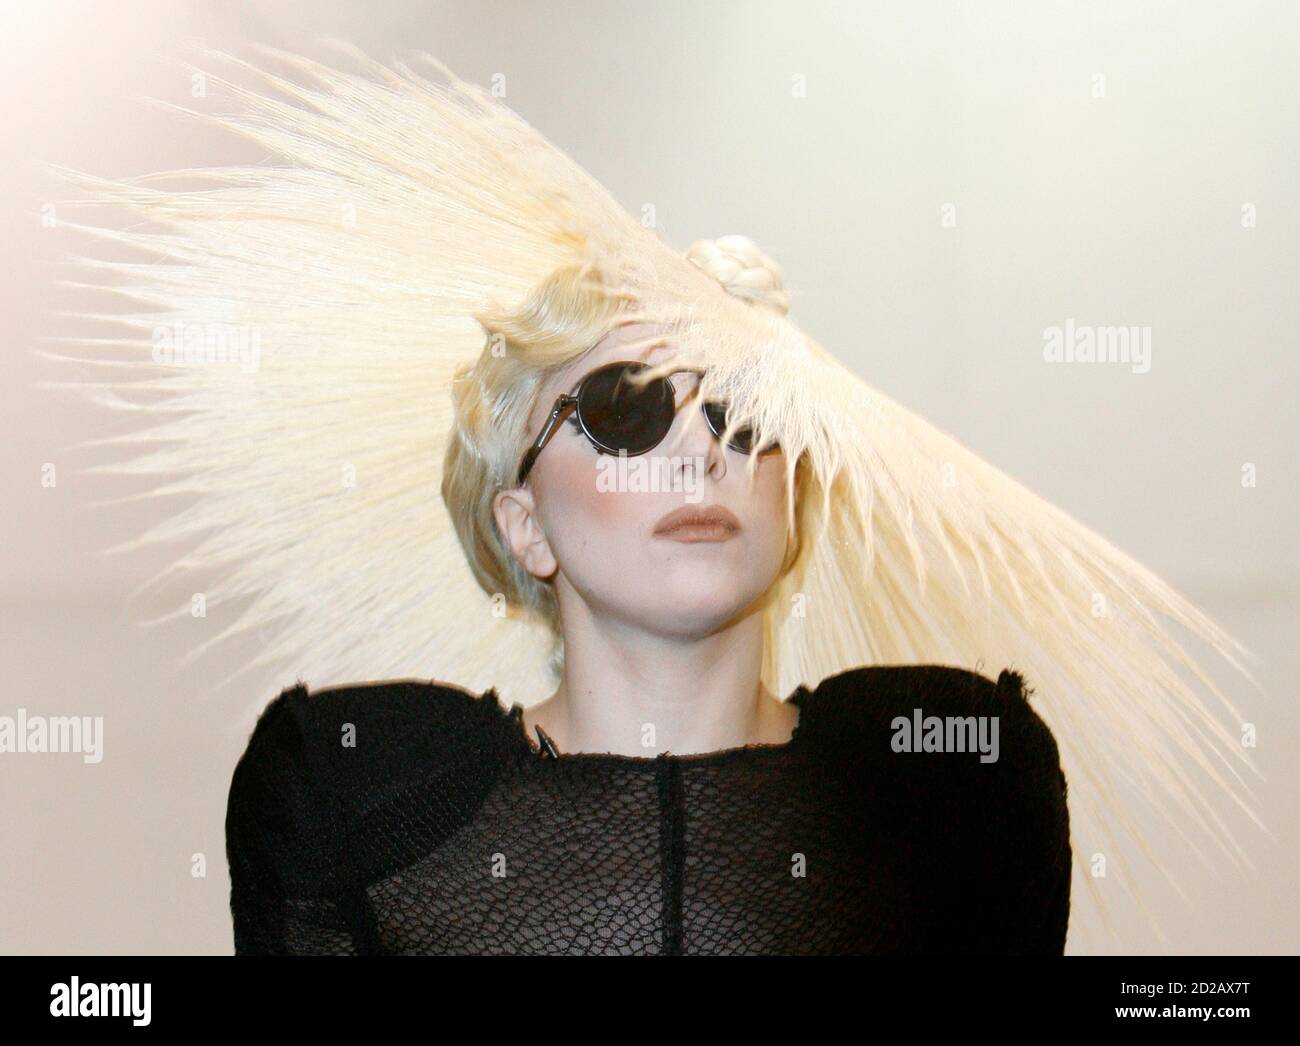 Singer Lady Gaga arrives at a media event where she was announced as Polaroid  creative director at the 2010 International Consumer Electronics Show (CES)  in Las Vegas January 7, 2010. The show